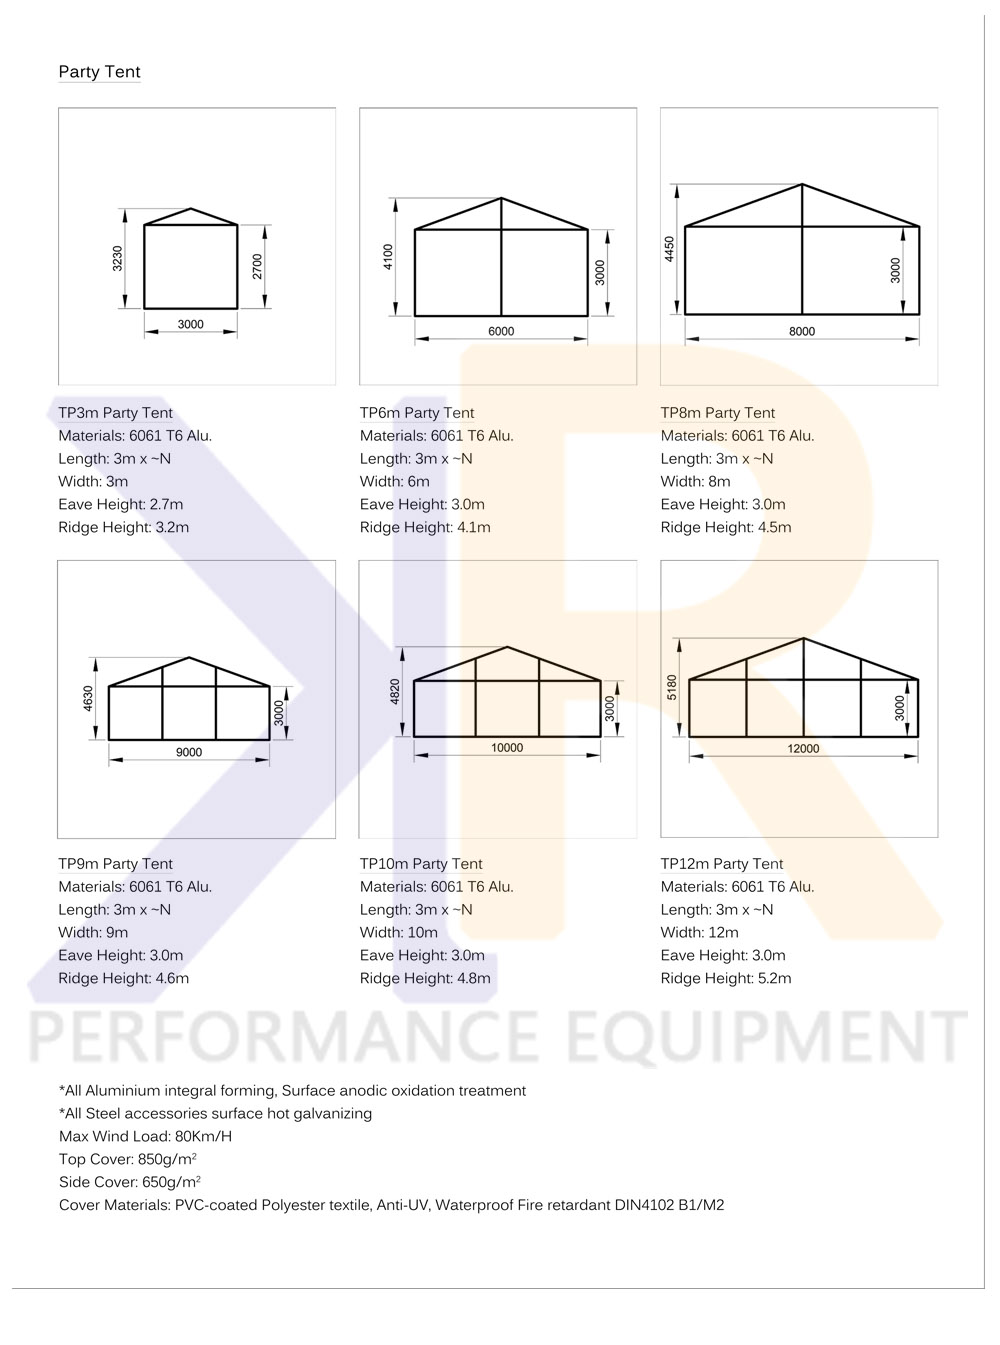 PARTYTENT_1